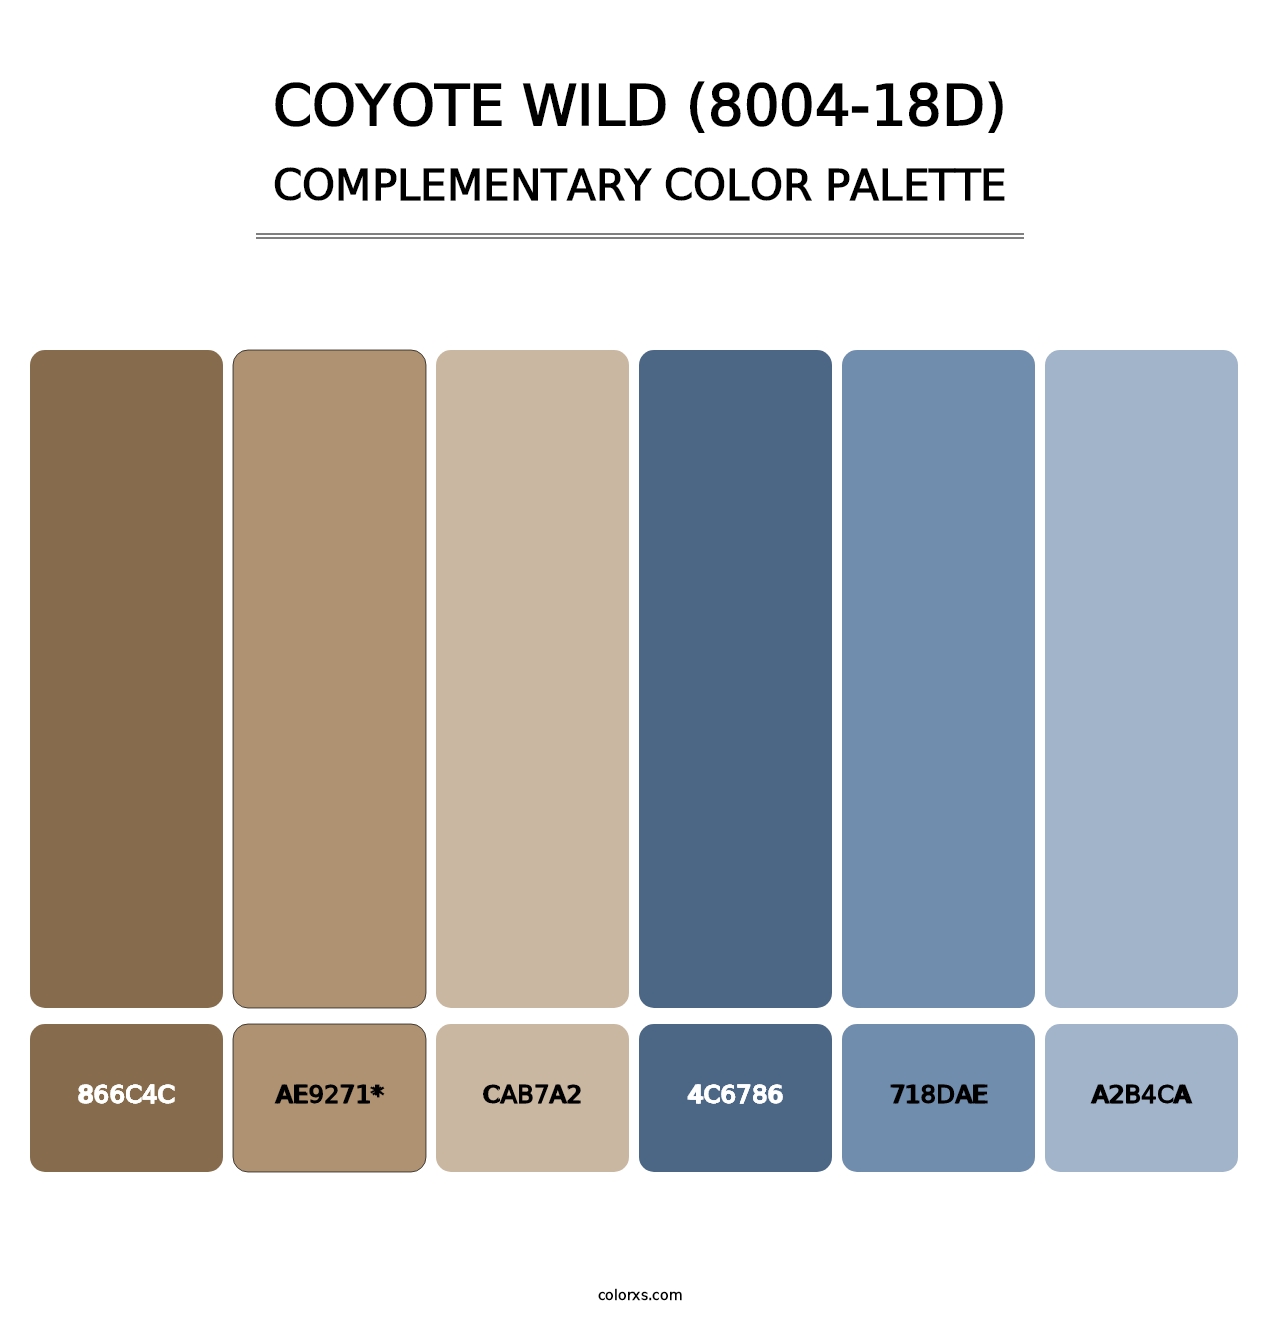 Coyote Wild (8004-18D) - Complementary Color Palette